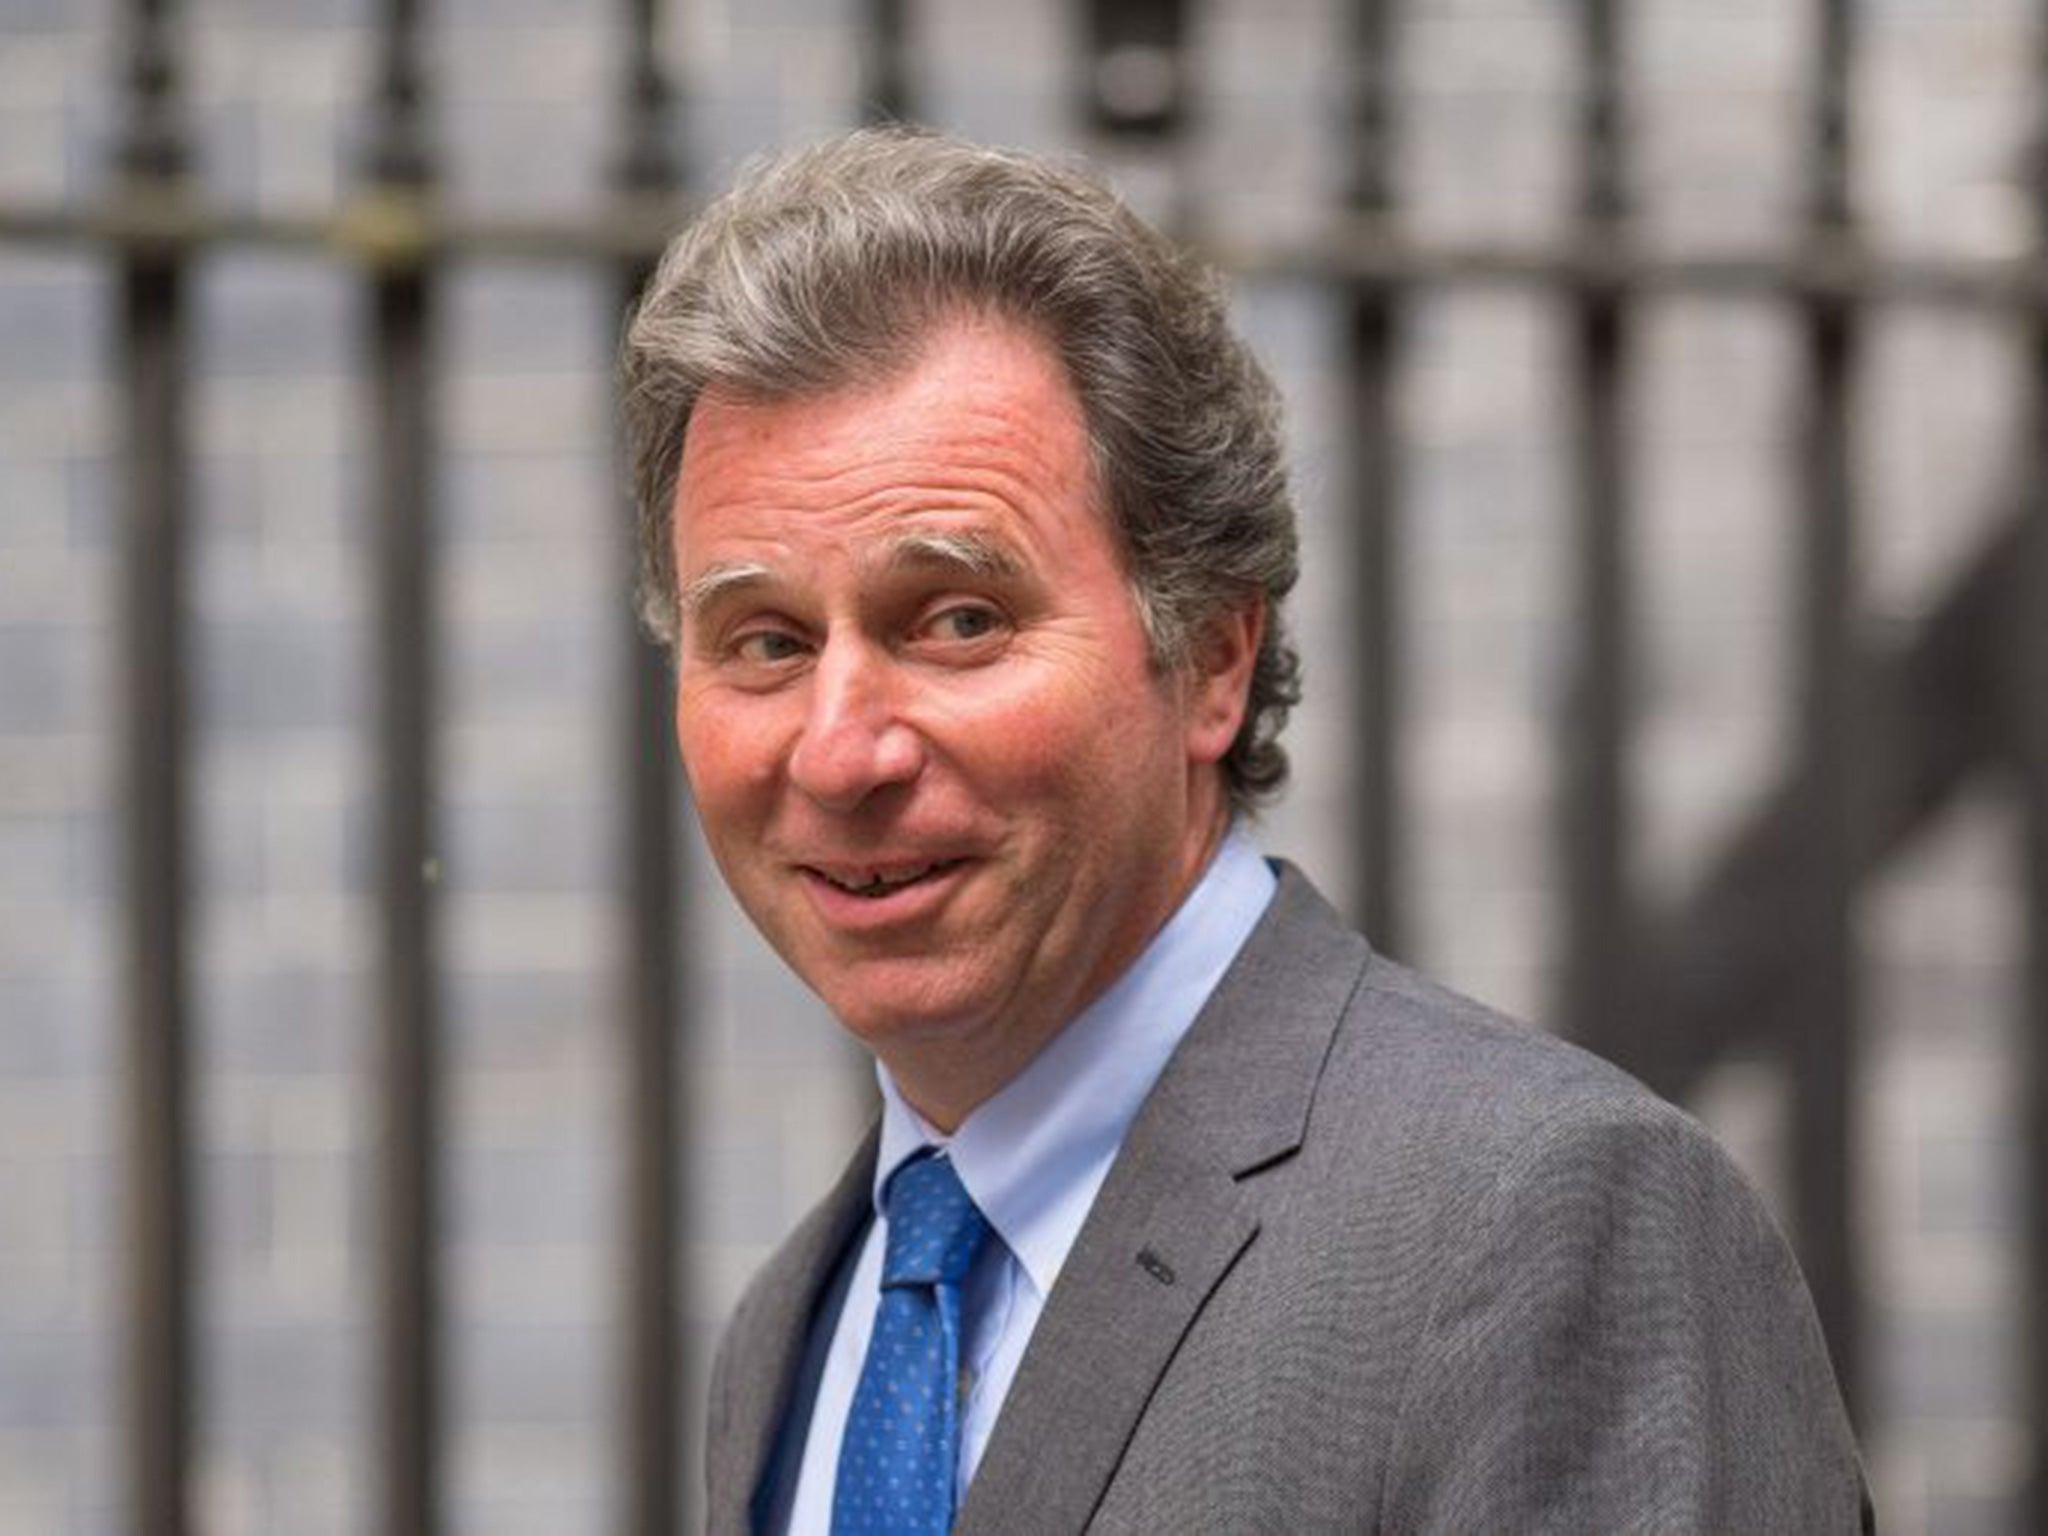 David Cameron's policy chief Oliver Letwin, who blamed "bad moral attitudes" for a series of devastating riots which erupted in predominantly black inner city areas in the mid 1980s